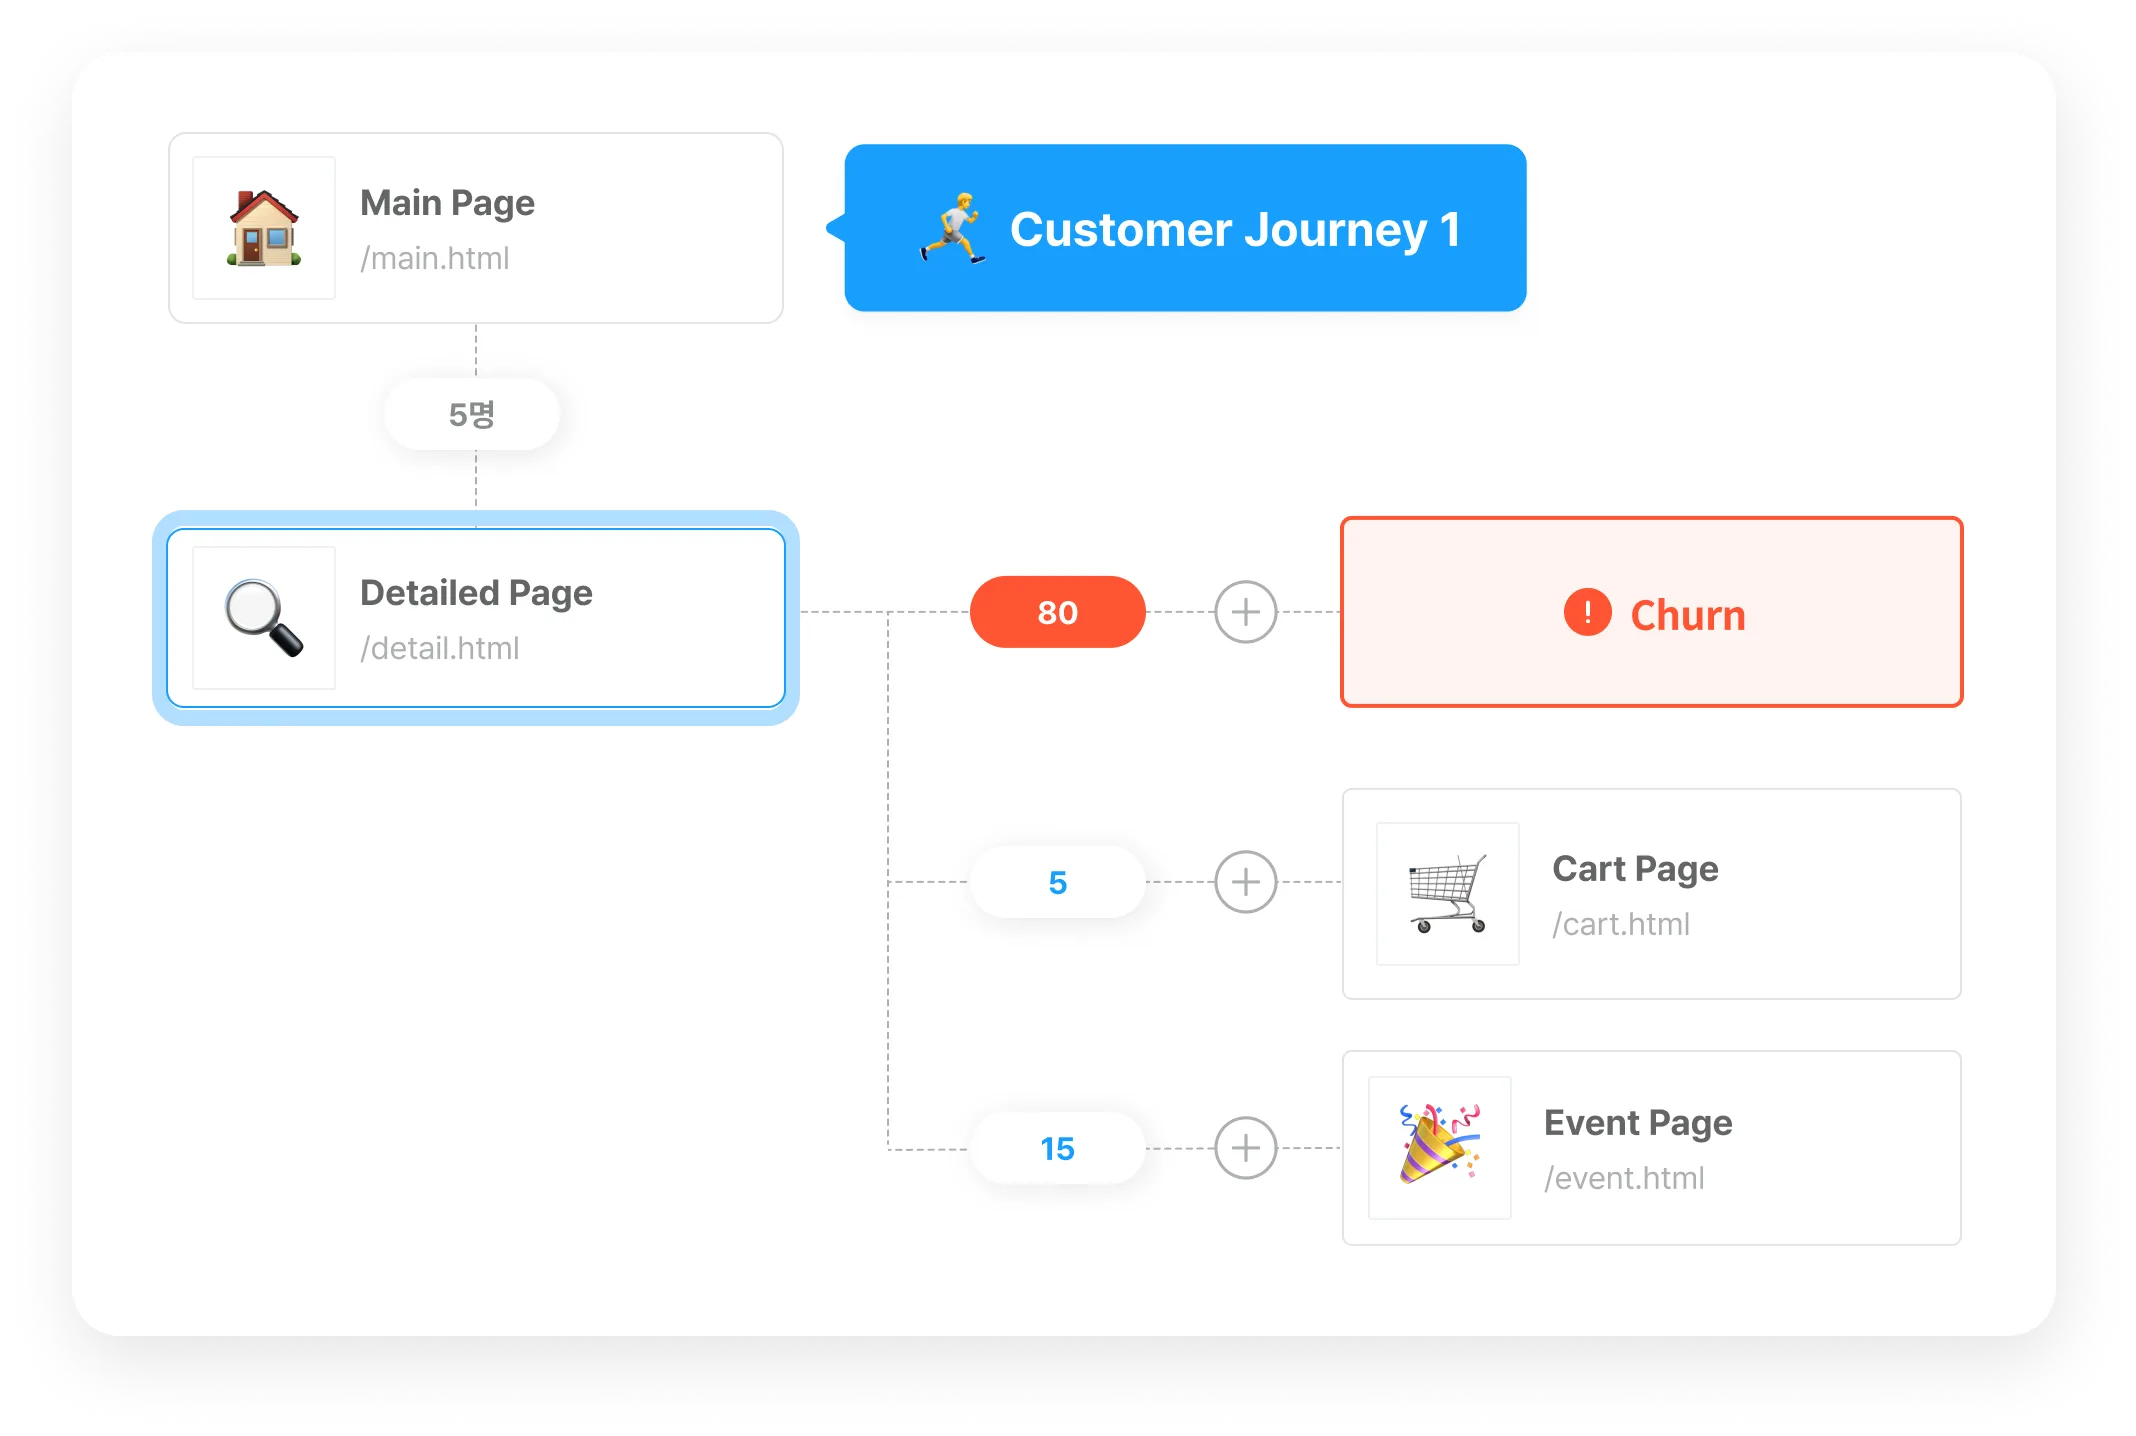 See Your Customers' Paths and Drop-Off Point Across Your Online Store